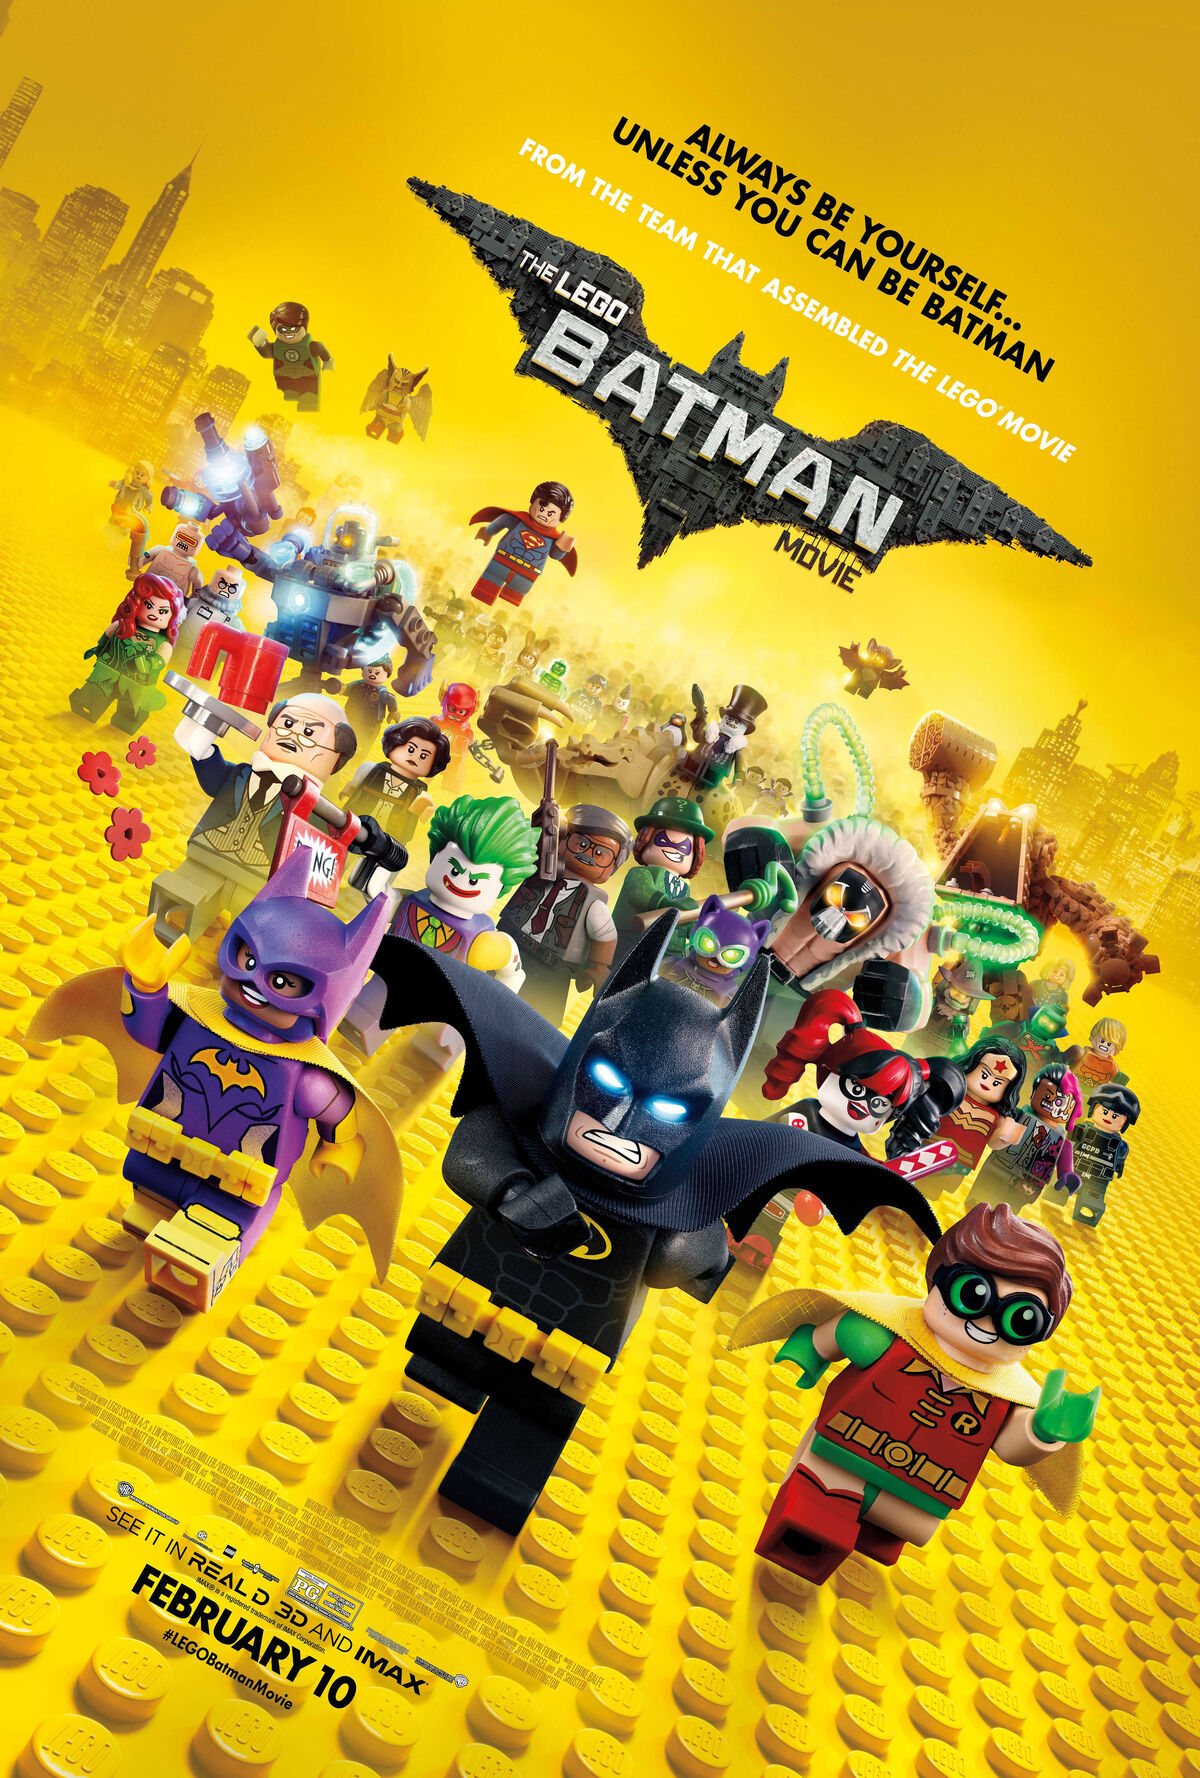 The Lego Batman Movie' Cast: Meet the Voices Behind Each Animated Character  – The Hollywood Reporter